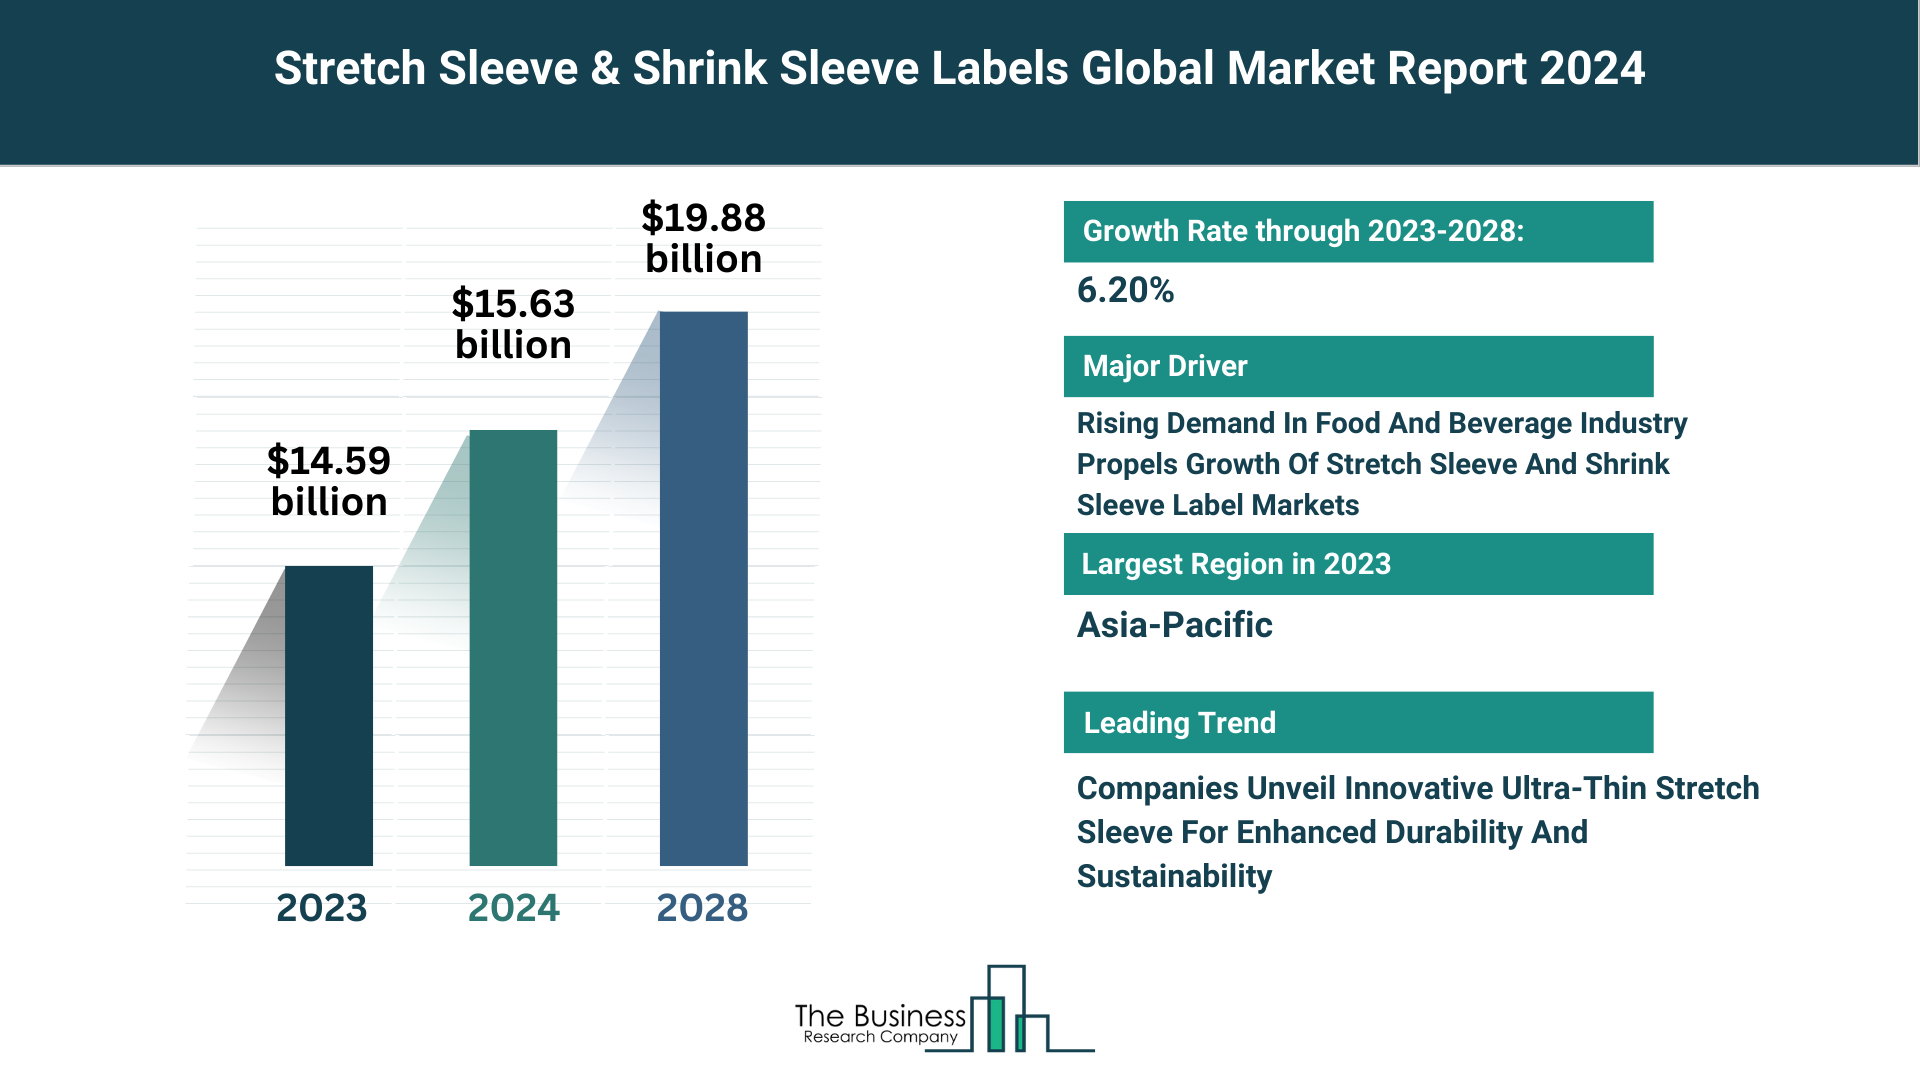 Global Stretch Sleeve & Shrink Sleeve Labels Market Report 2024: Size, Drivers, And Top Segments